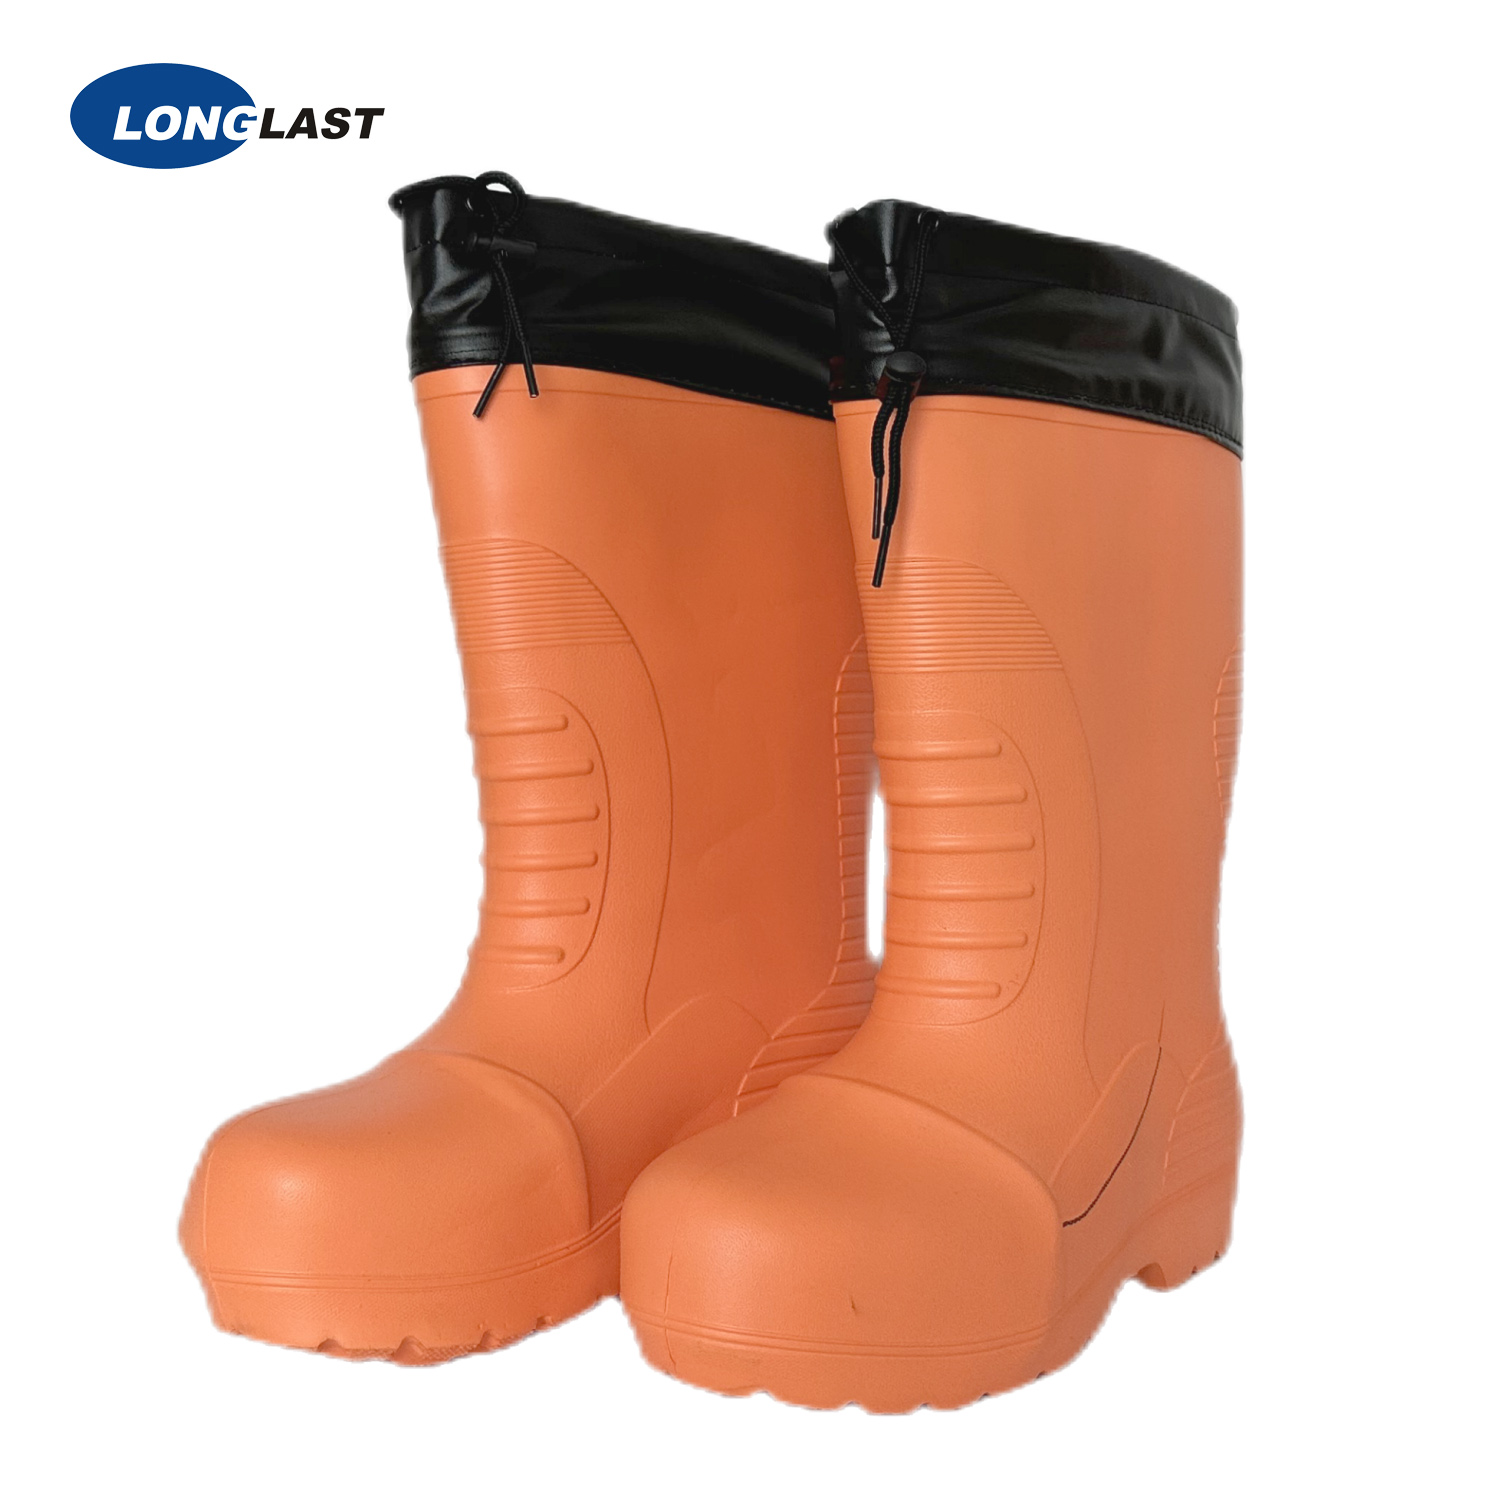 Light Weight EVA boots for Outdoor